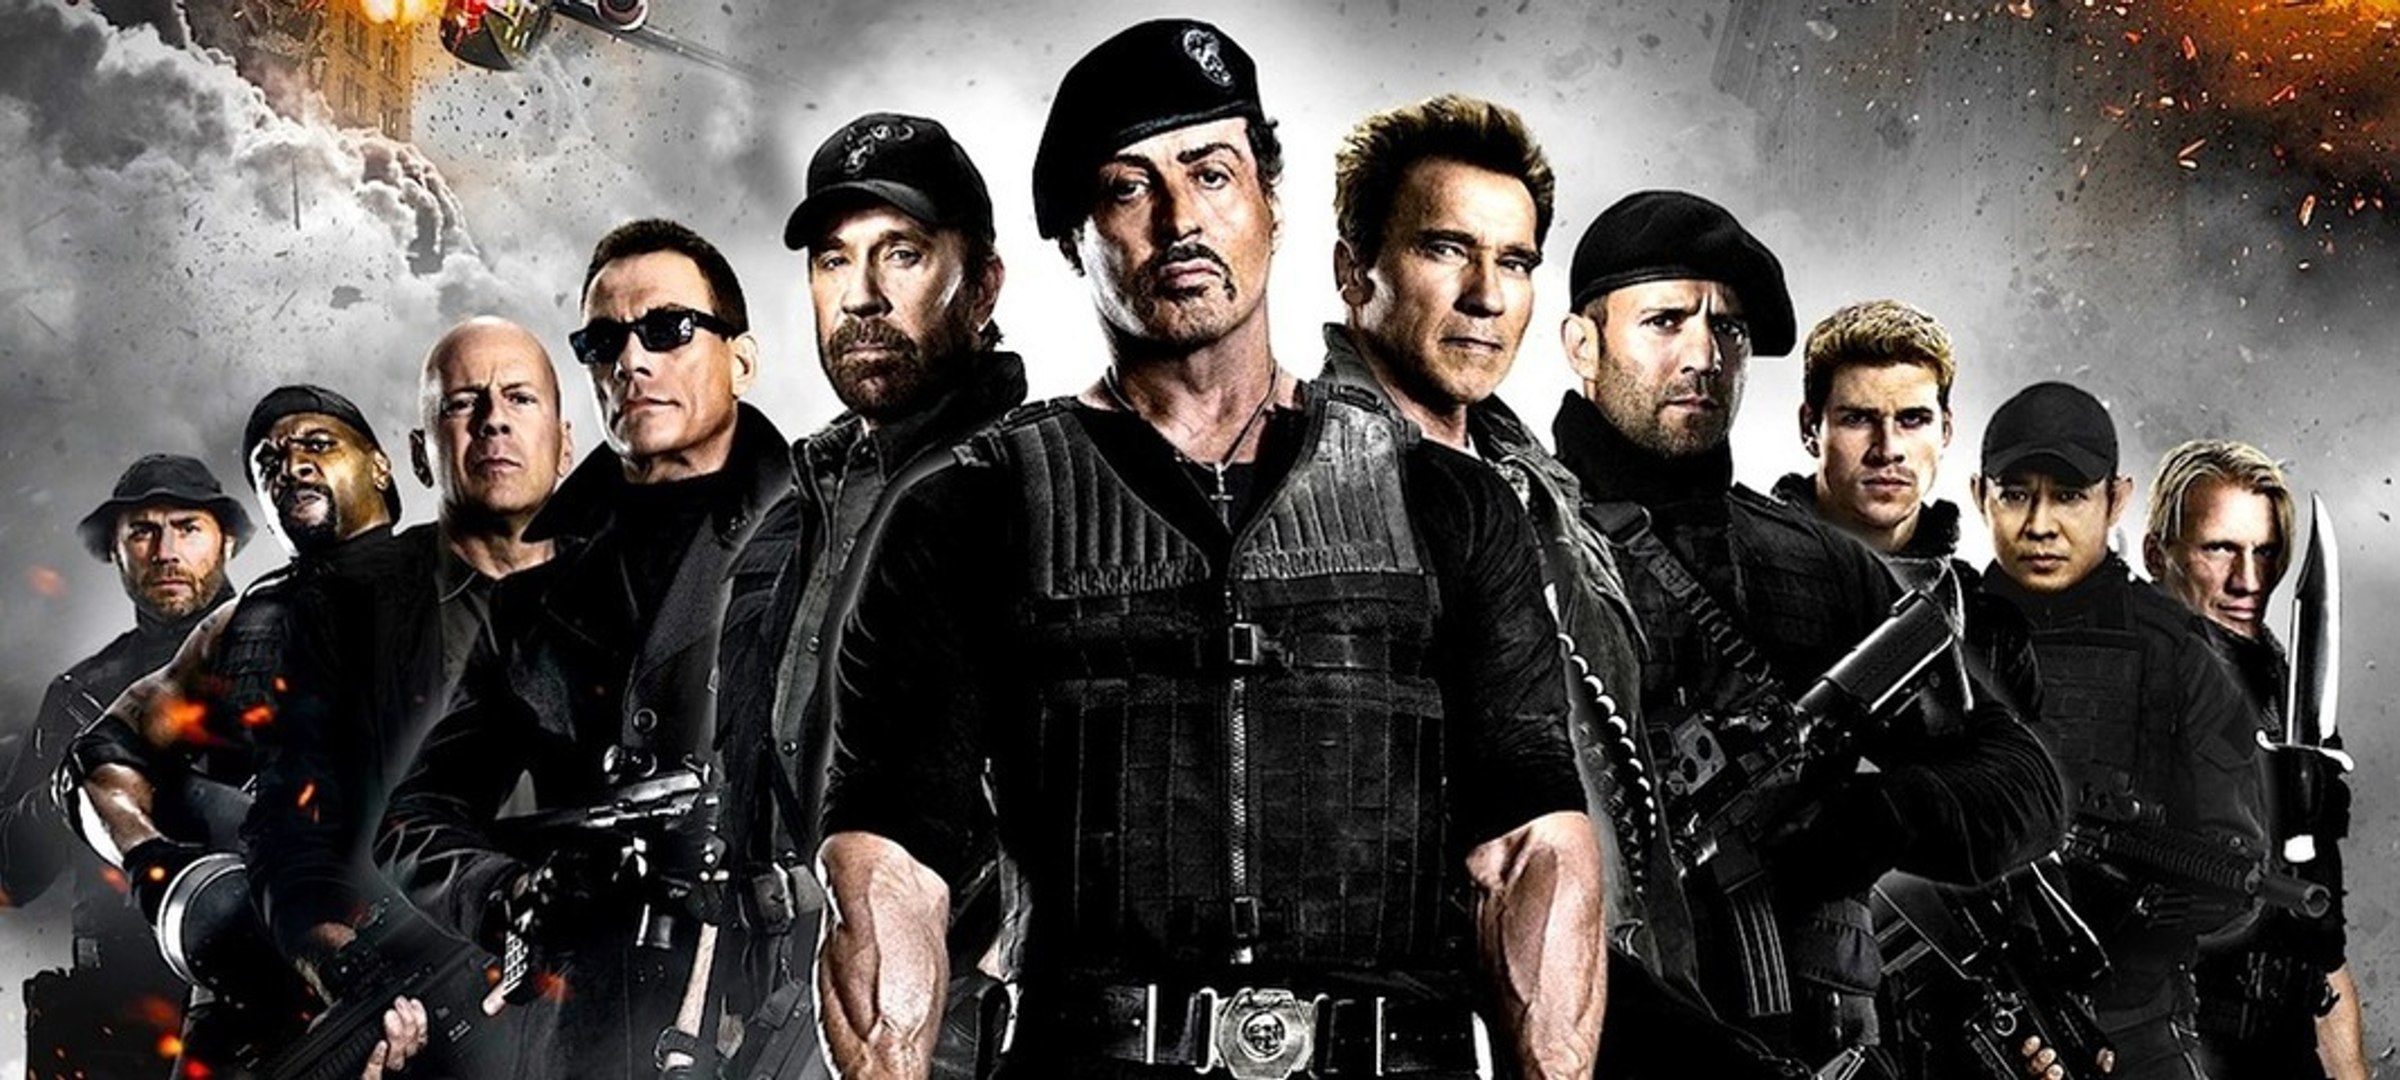 The Expendables 2 – Fan Reviews - video Dailymotion